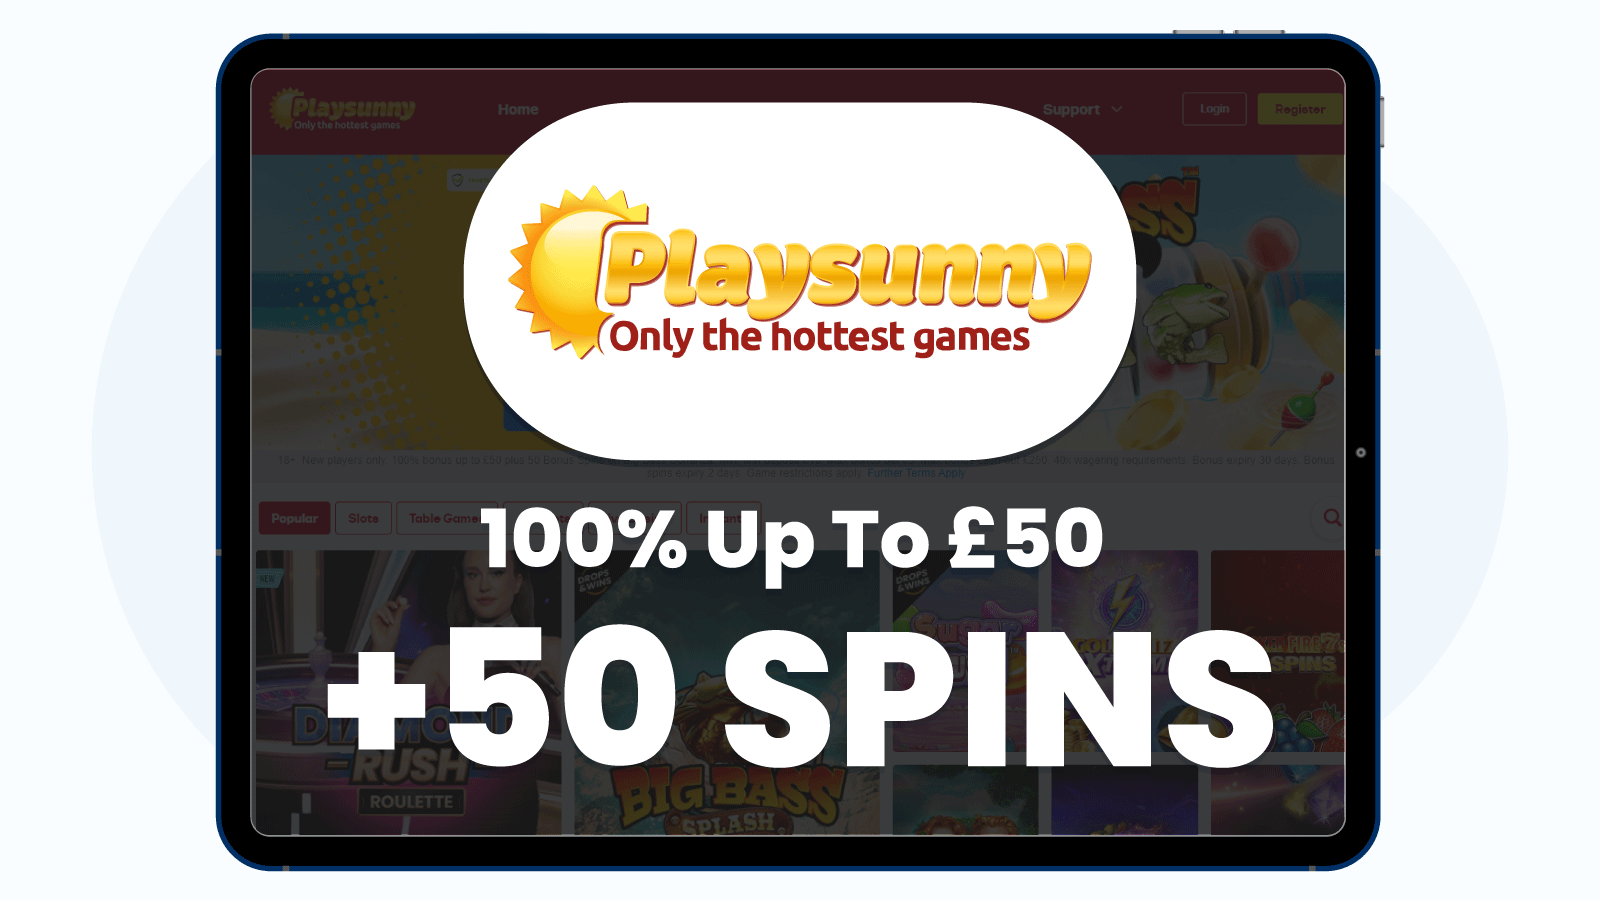 Get 100% Up To £50 + 50 Extra Spins At Playsunny Casino